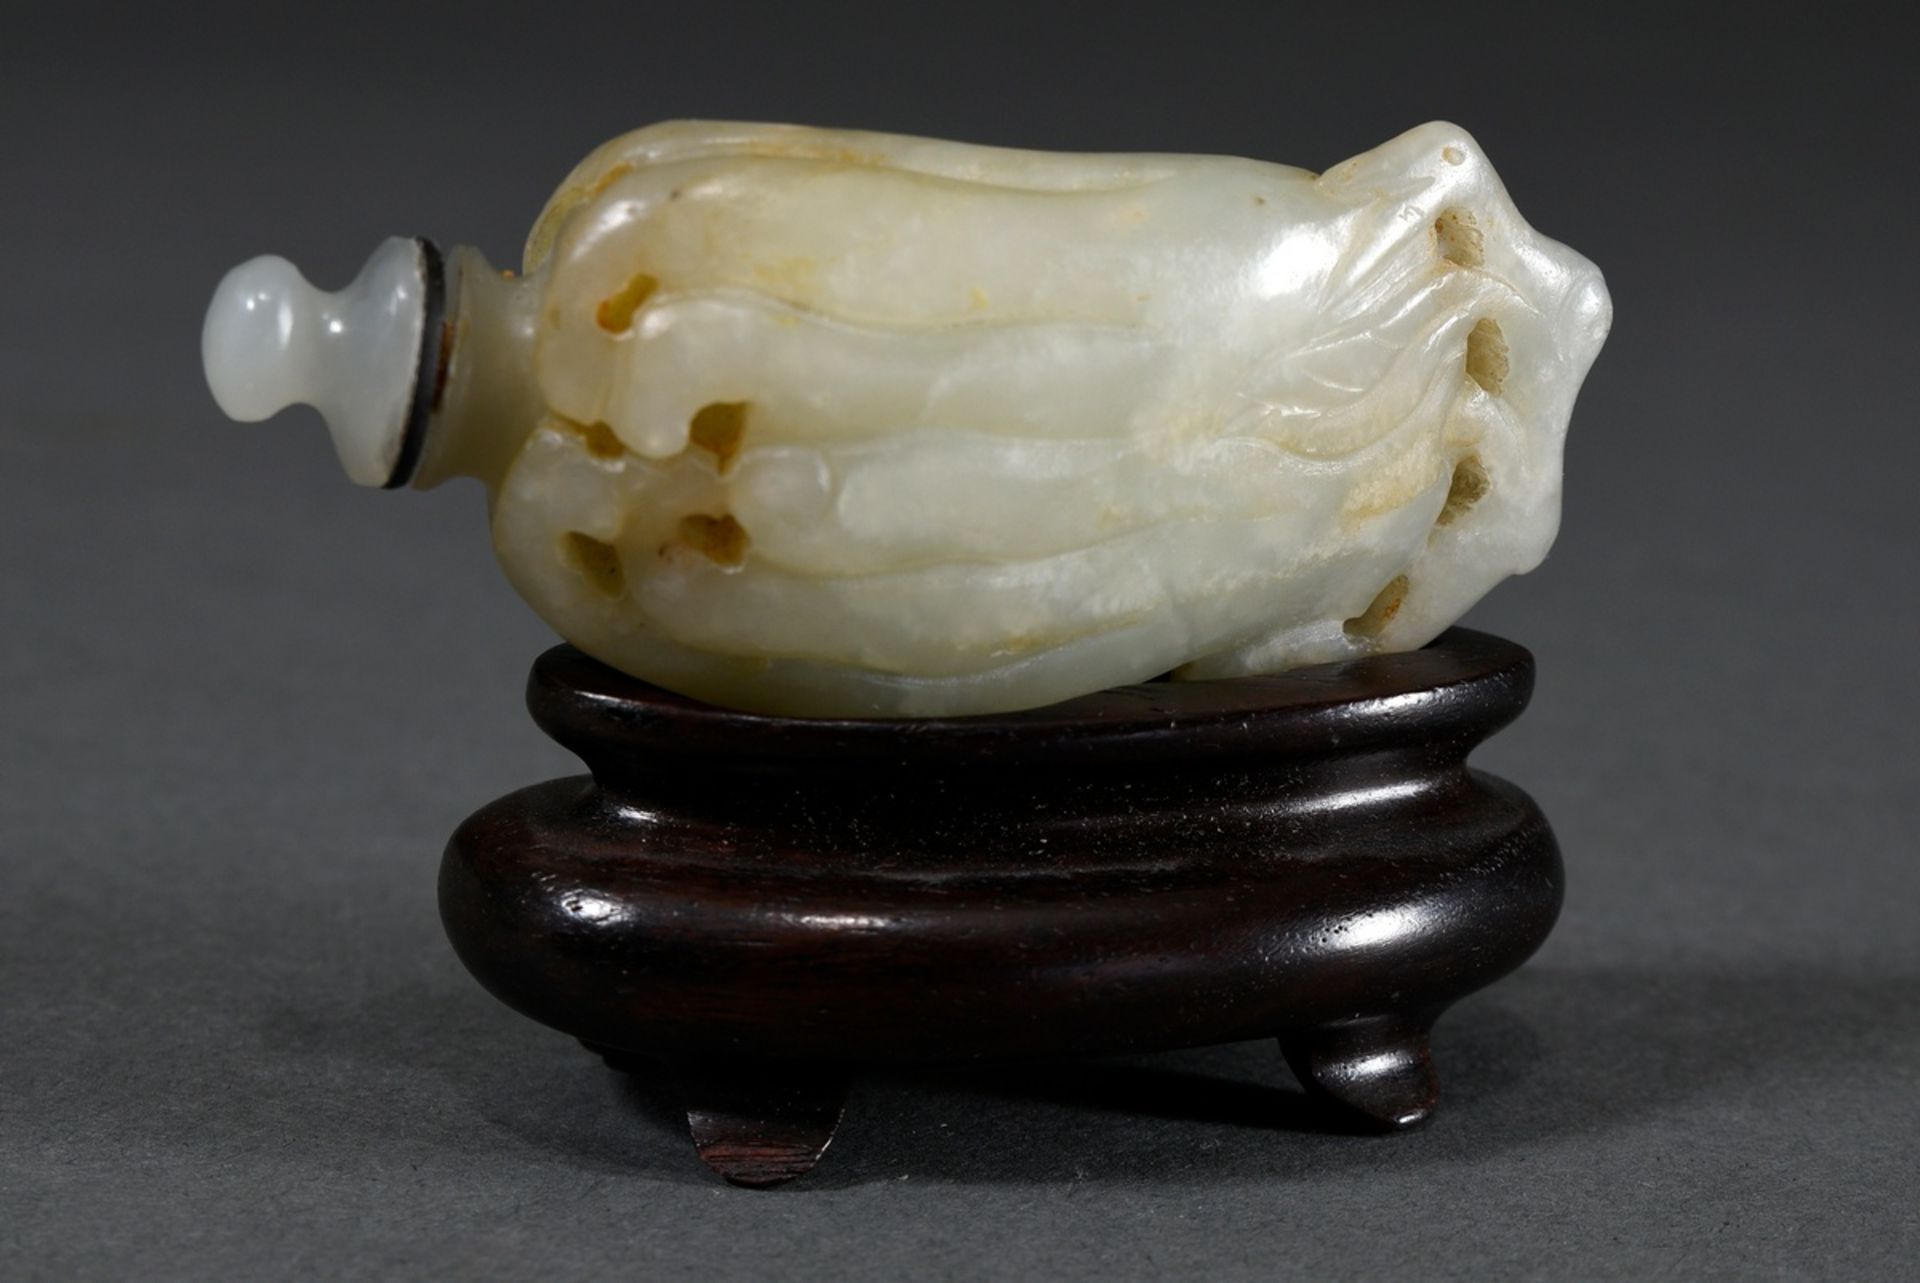 Light celadon jade snuffbottle "Buddhahand lemon", thin-walled hollowed, China Qing dynasty, on a l - Image 2 of 3